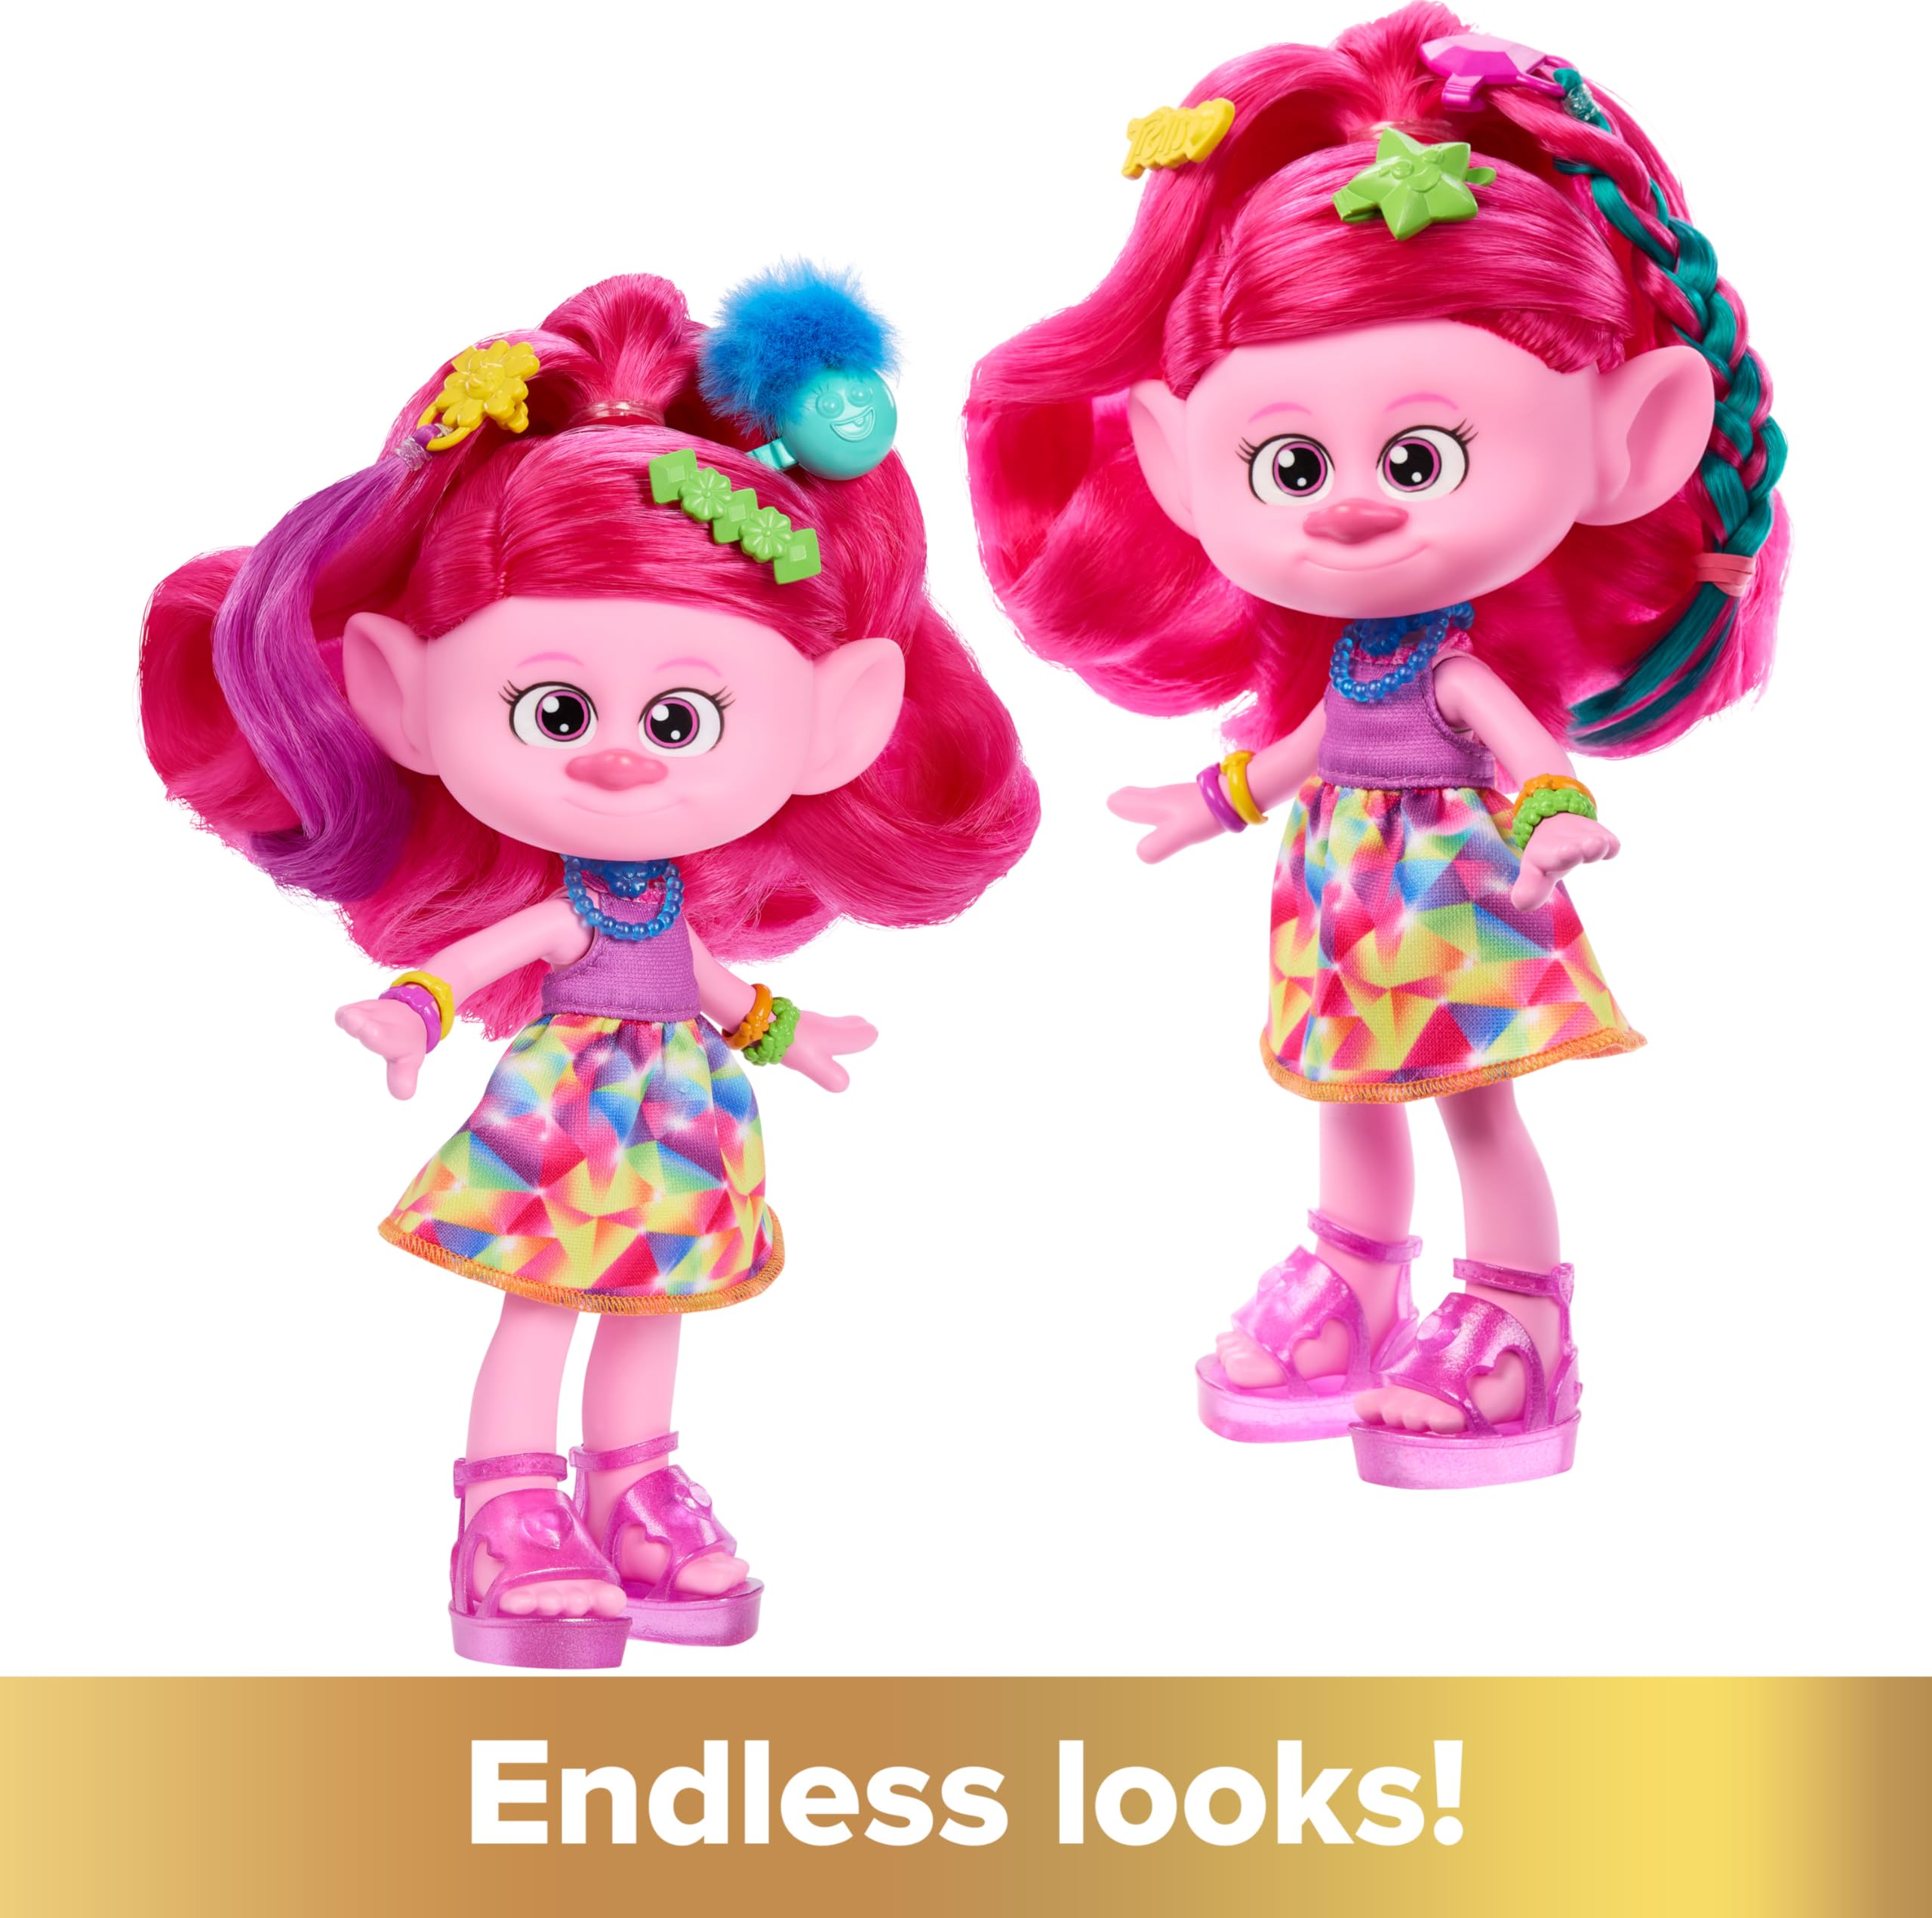 Mattel Trolls Band Together Doll & 15+ Accessories, Hair-tastic Queen Poppy Fashion Doll with Glitter Comb